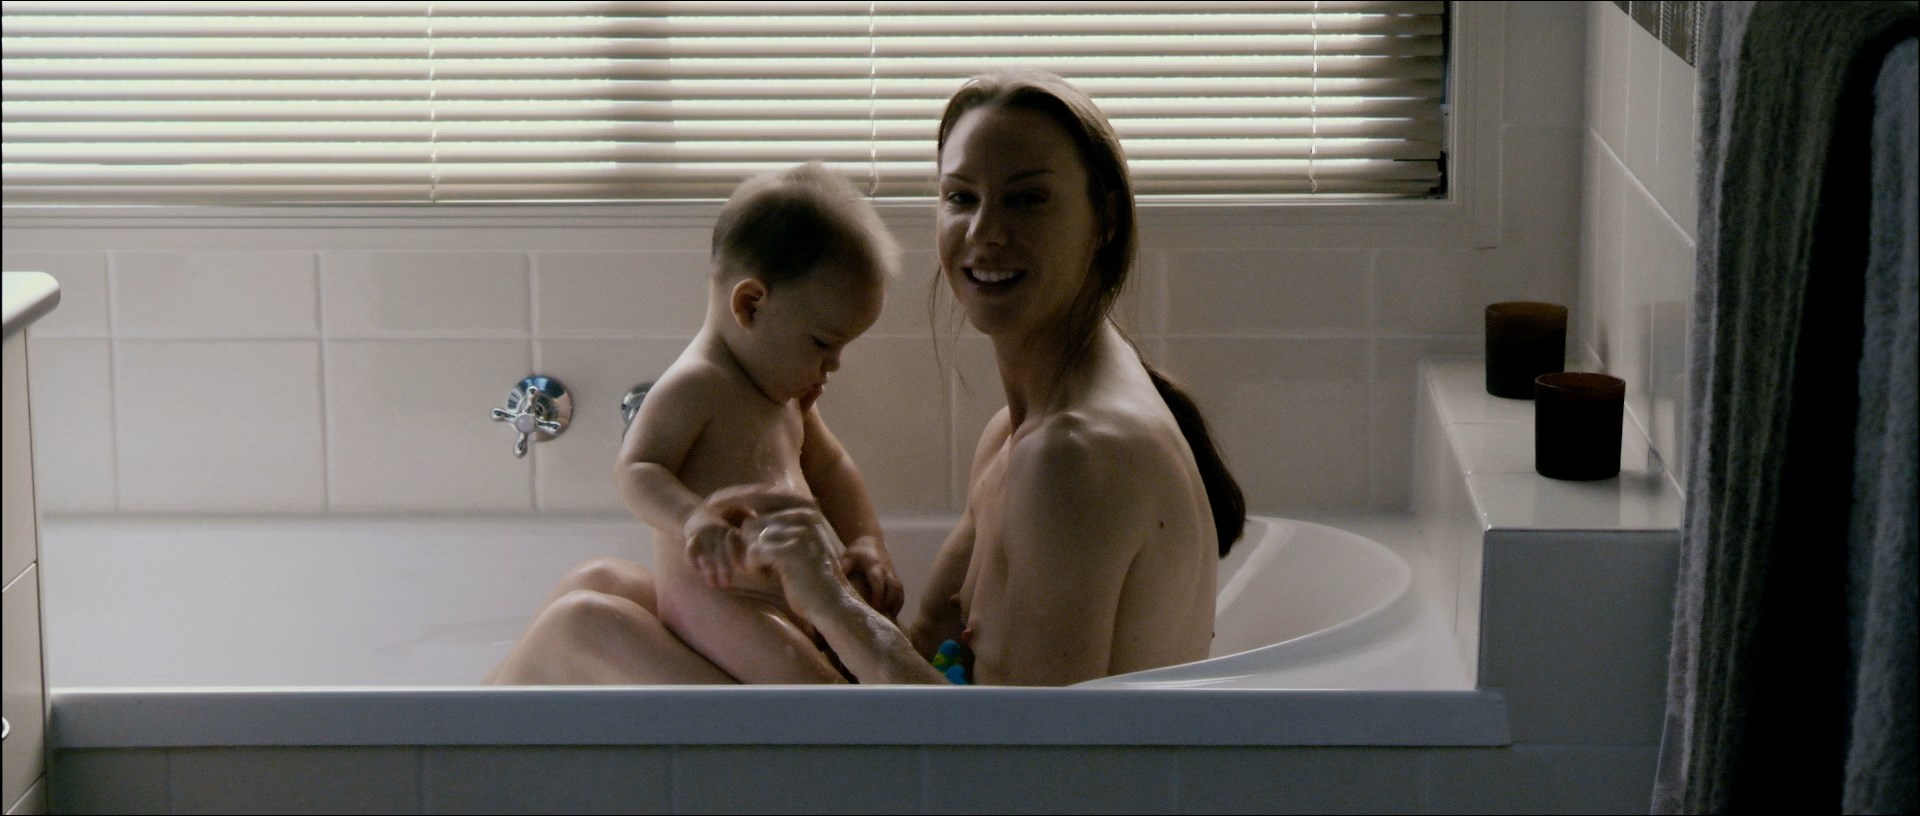 Belinda McClory is on a bathtub topless with little kid. 